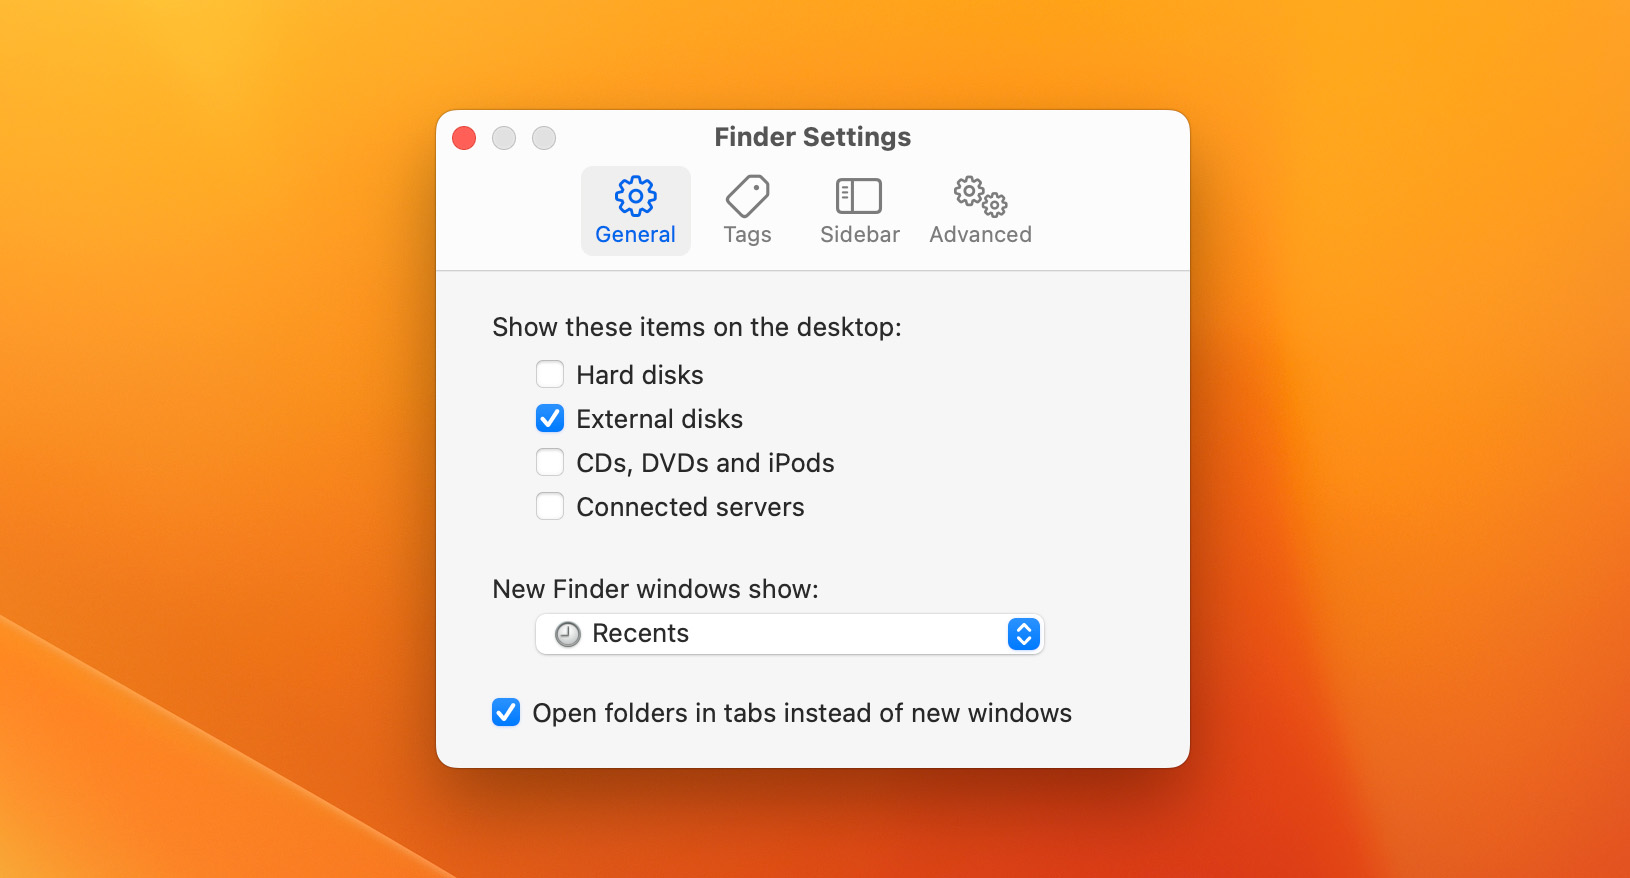 Image showing how to check external drives in finder settings to make external disks visible